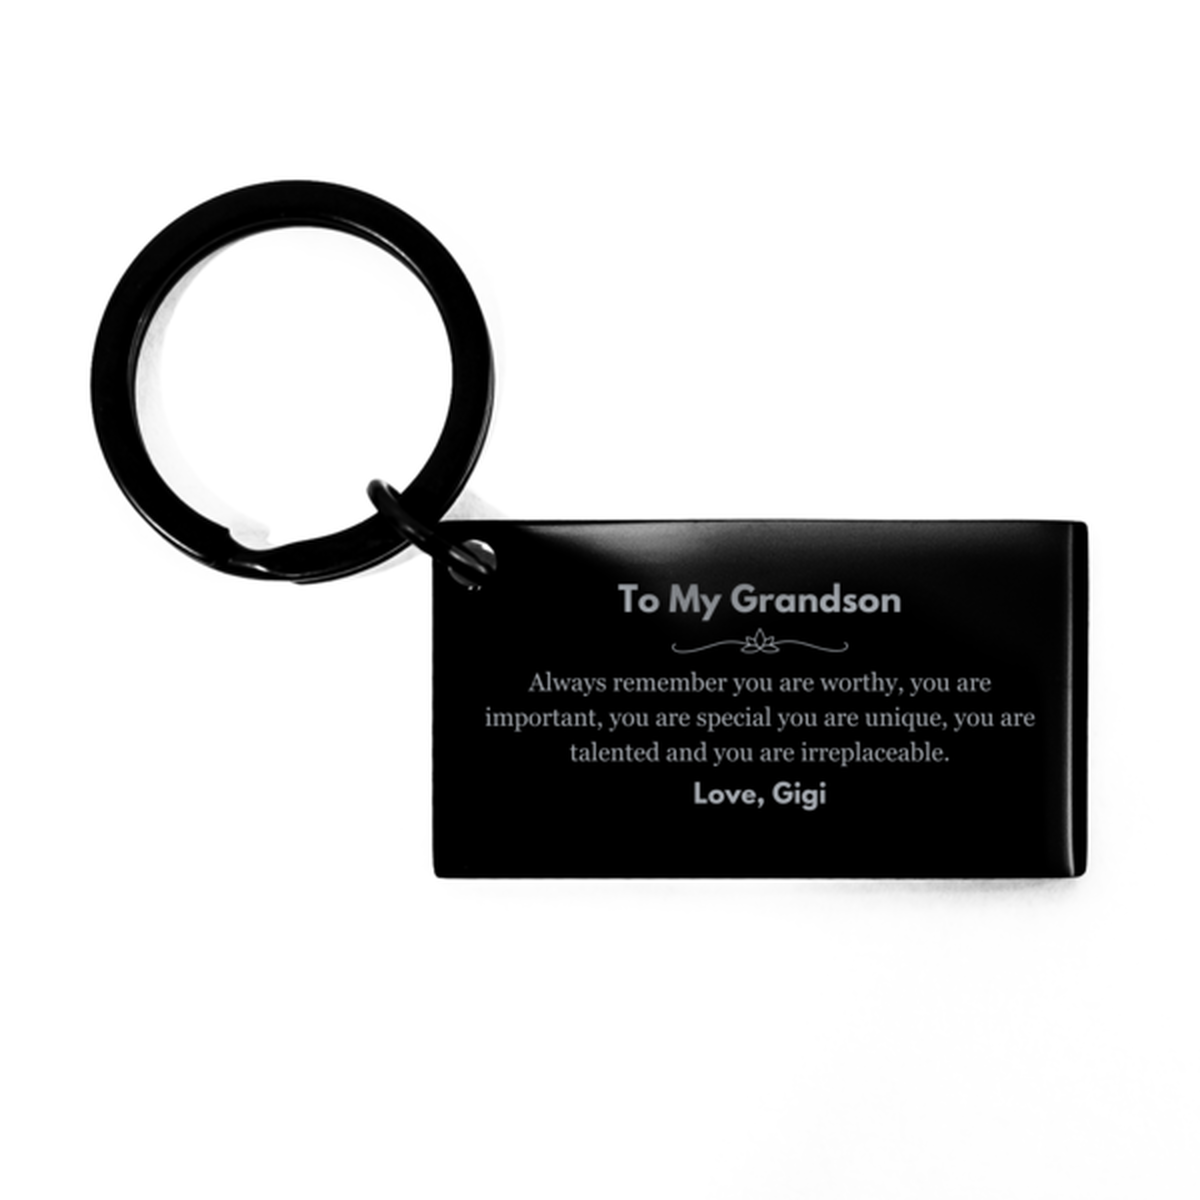 Grandson Birthday Gifts from Gigi, Inspirational Keychain for Grandson Christmas Graduation Gifts for Grandson Always remember you are worthy, you are important. Love, Gigi